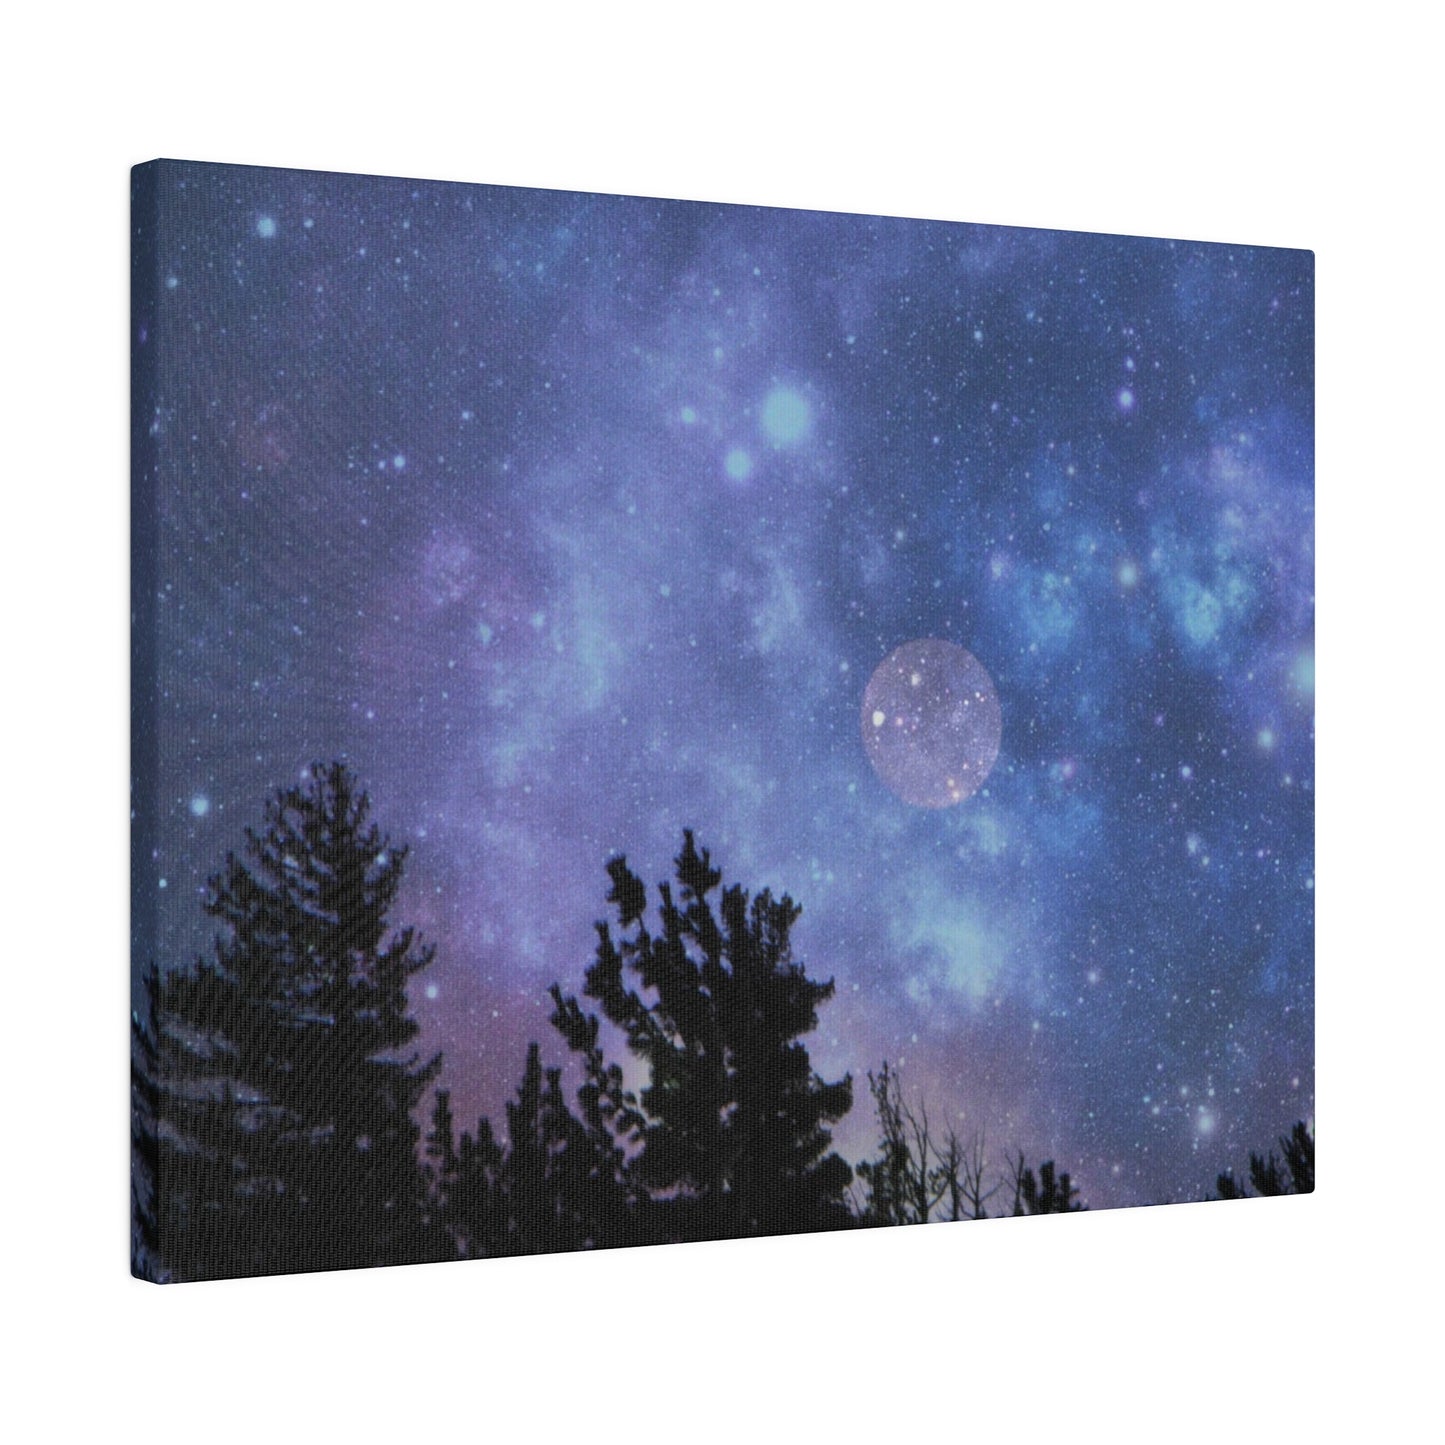 Canvas print of a night sky with stars and a full moon, silhouetted by pine tree outlines, presented on a Printify Blue-Moon Matte Canvas and encased in a radial pine frame sourced from.